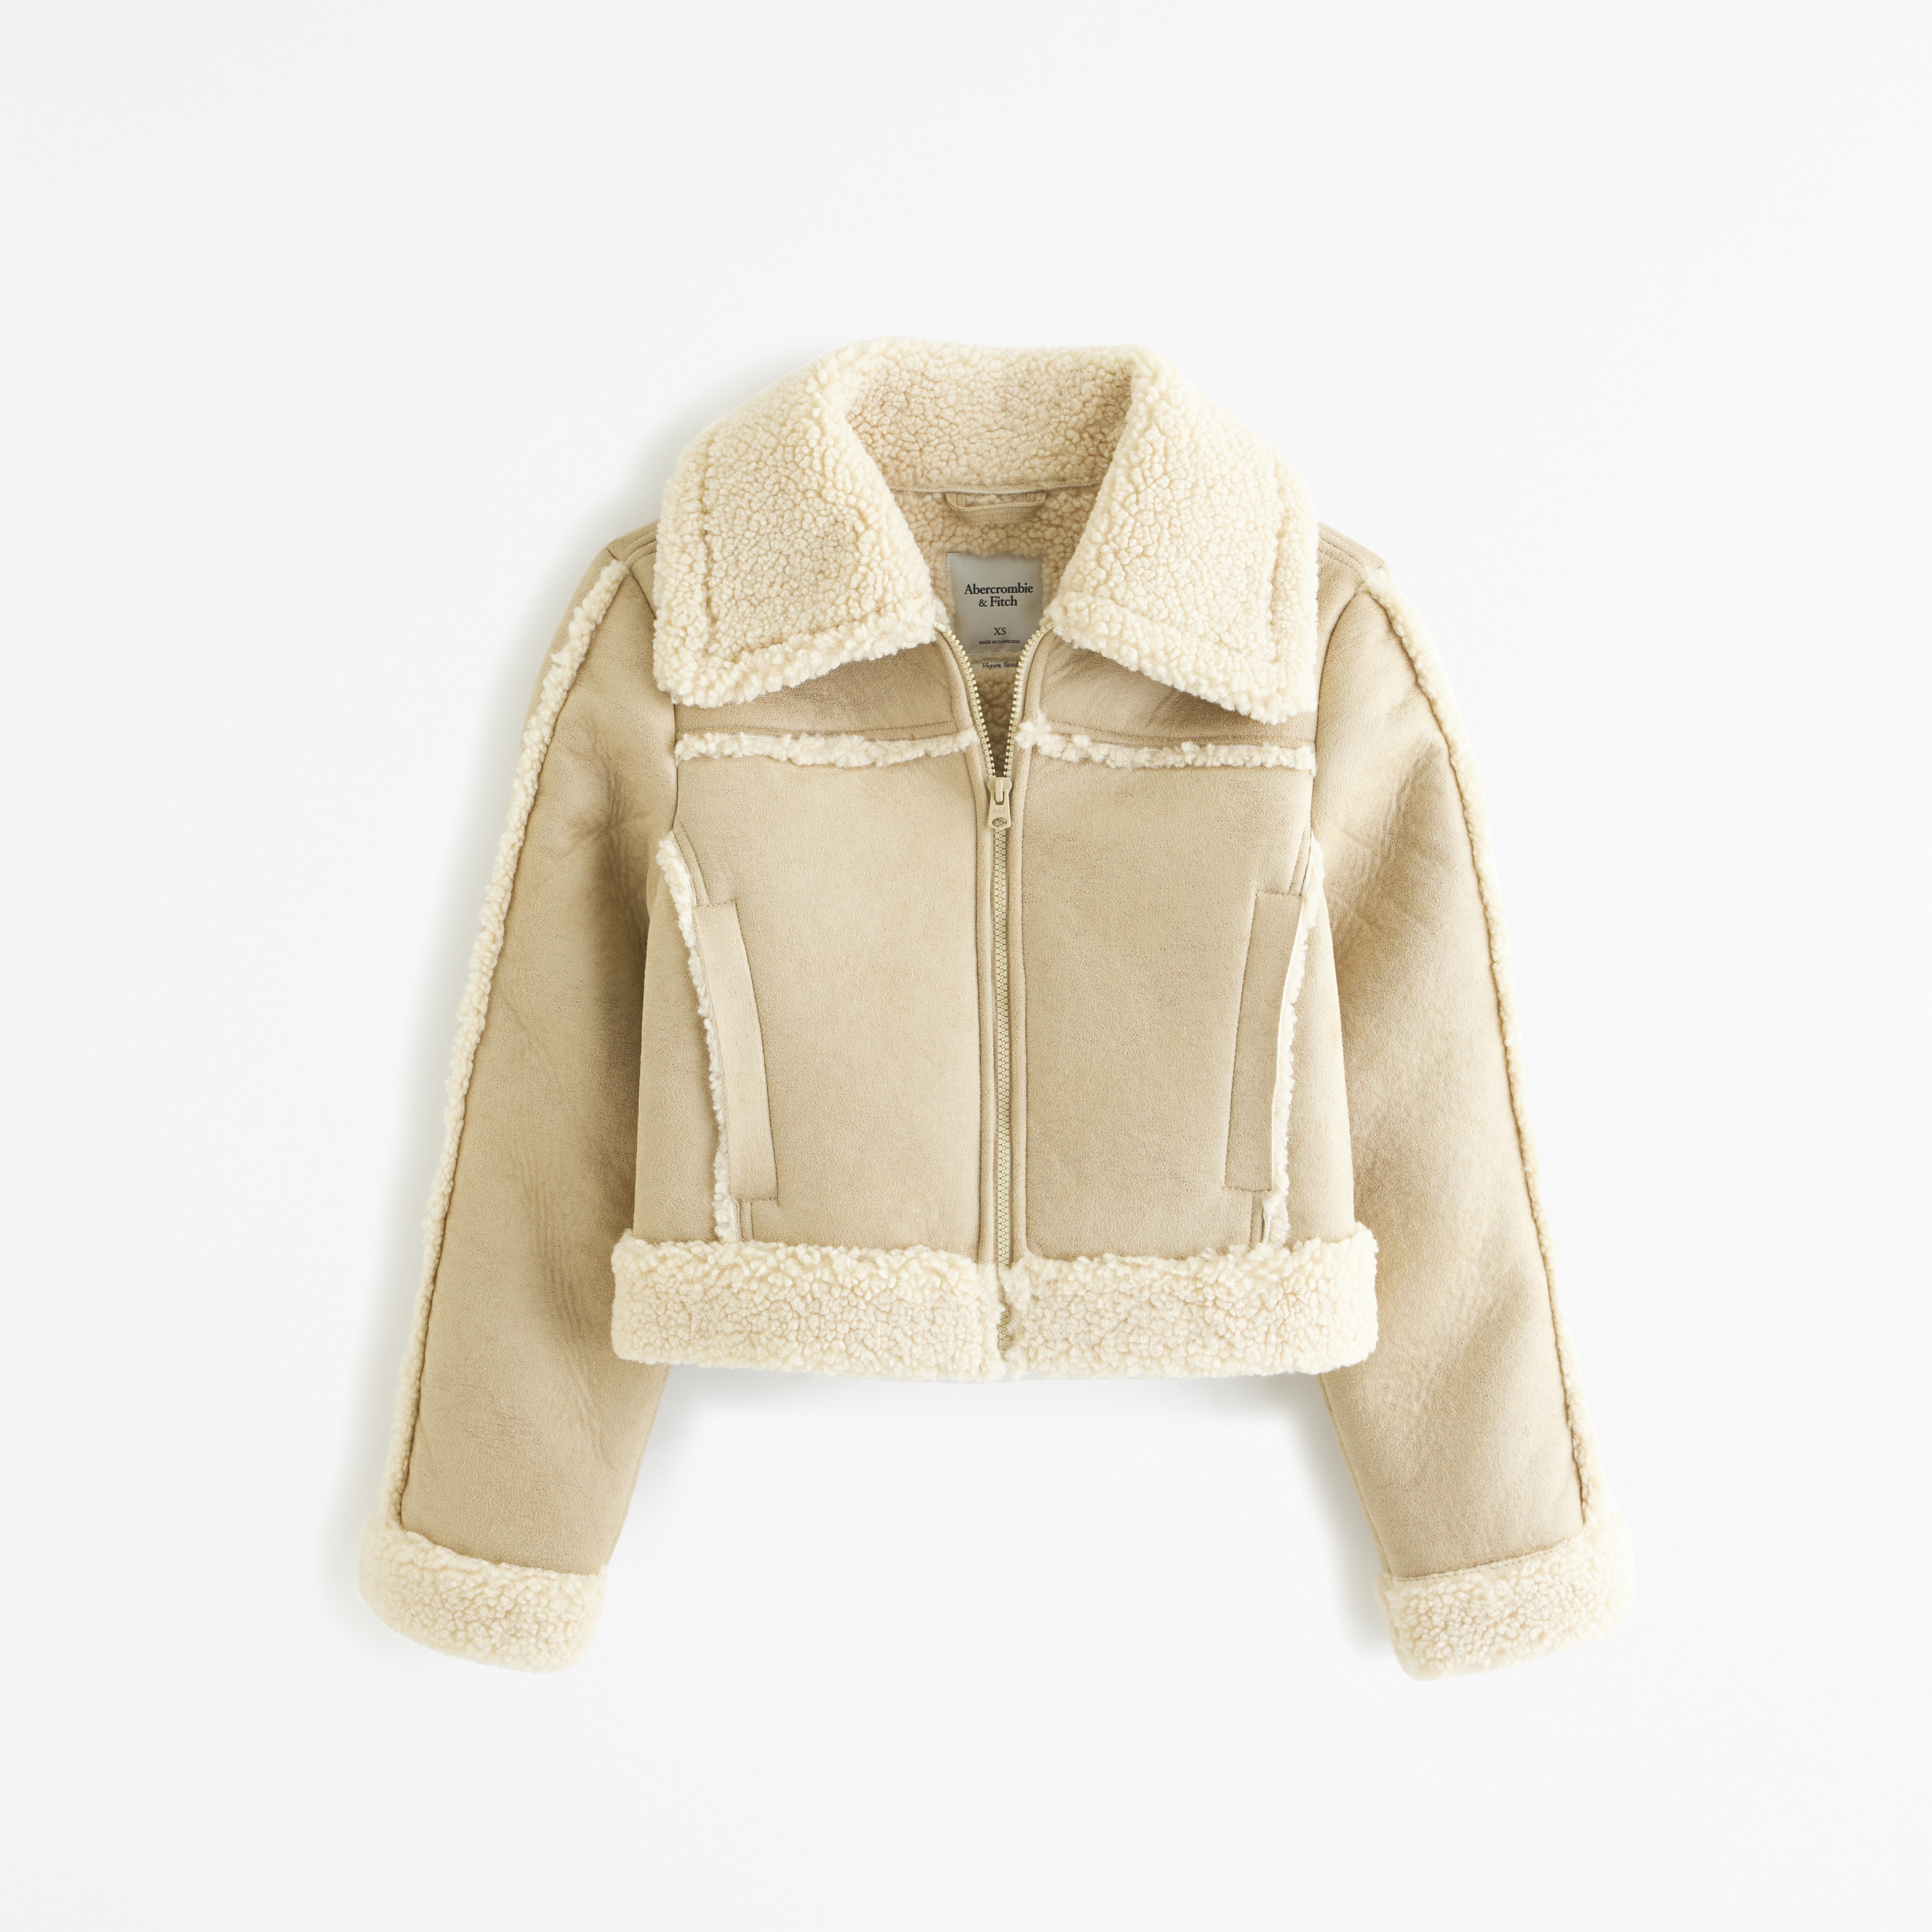 Abercrombie & Fitch Cropped Vegan Suede Shearling Jacket